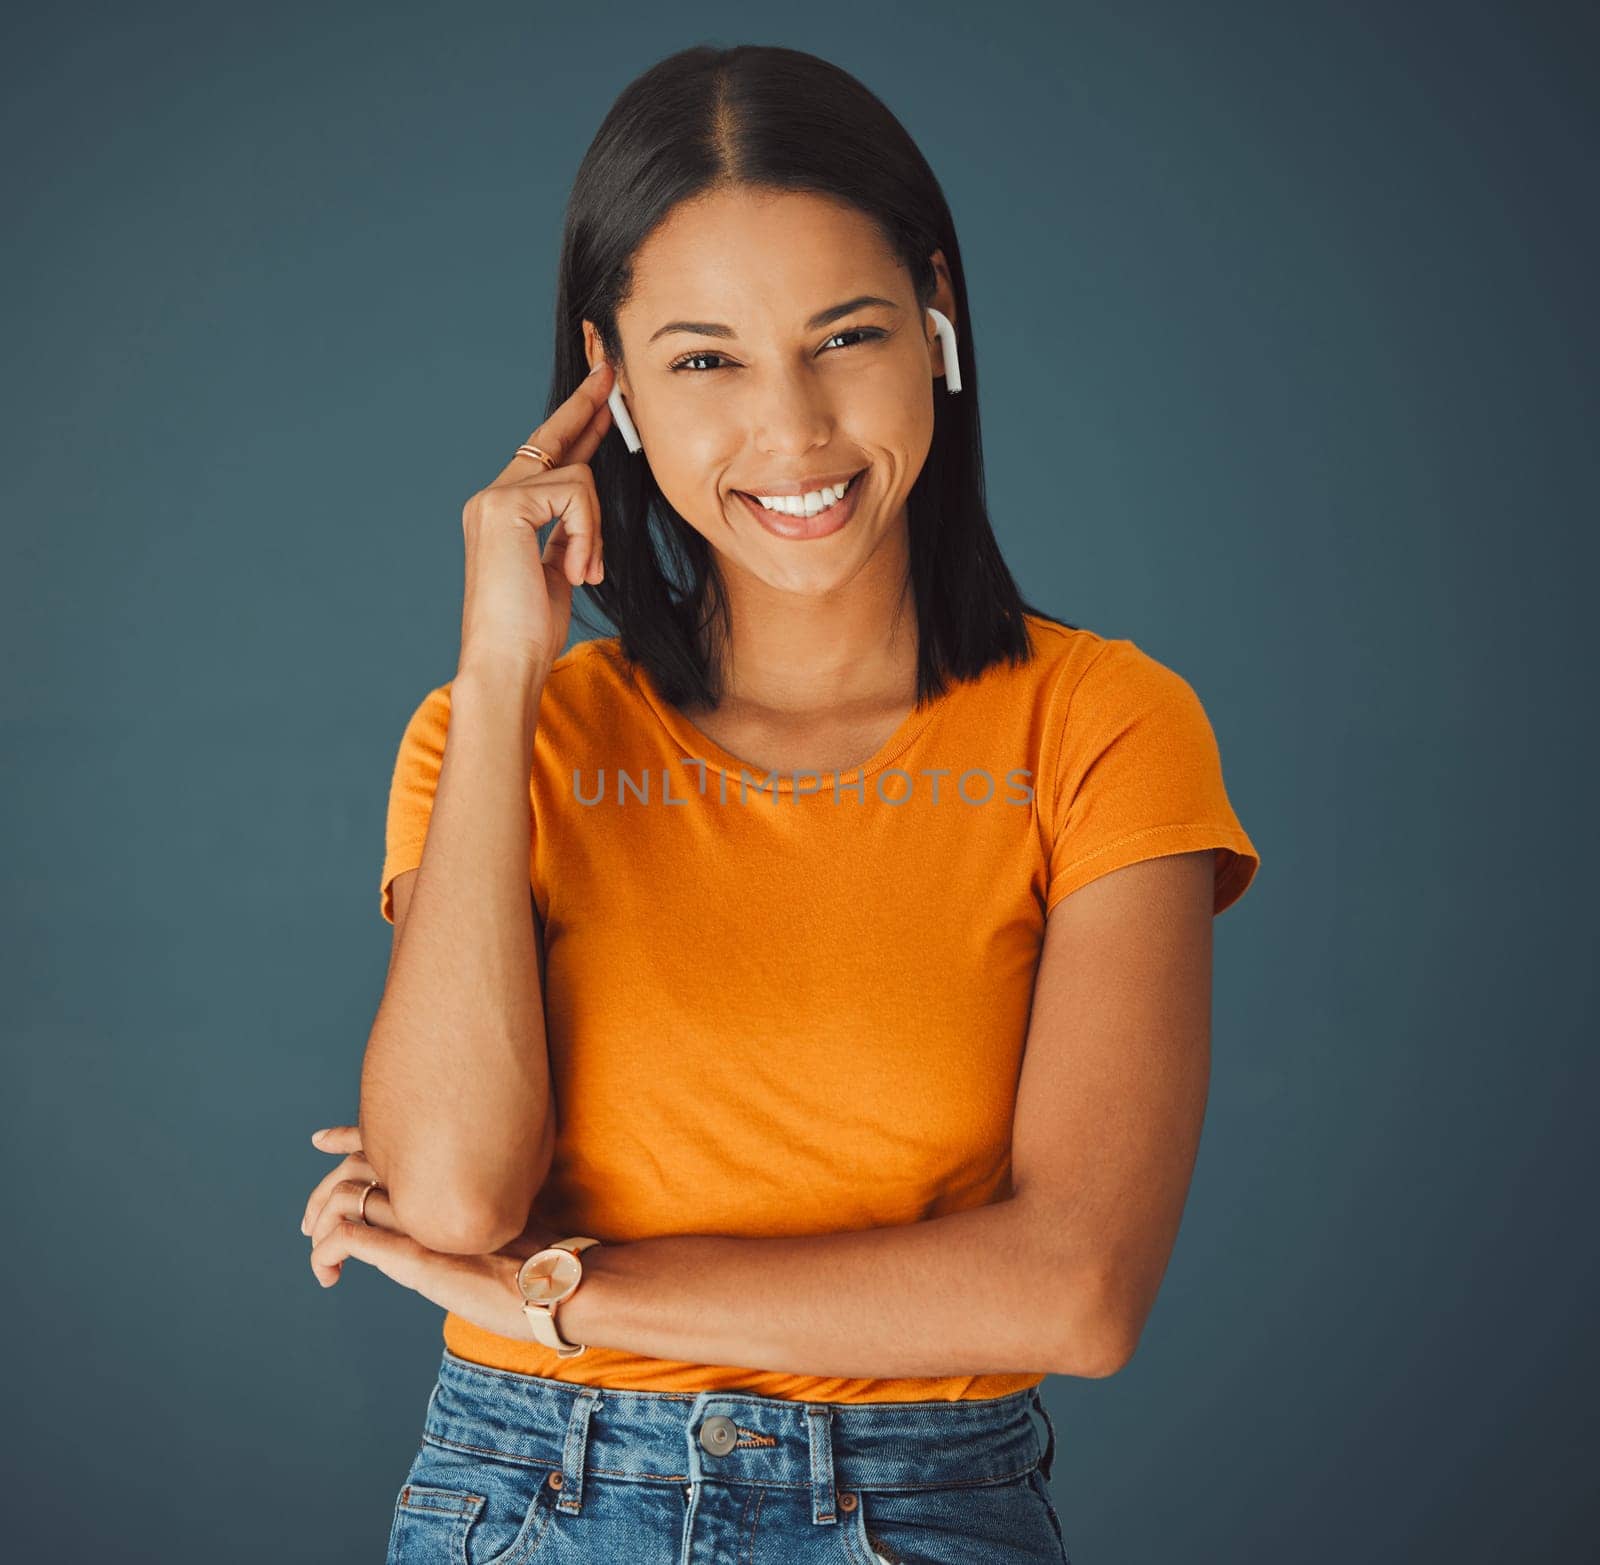 Woman, portrait and listening to music online while happy on a studio background. Smile on face of a young gen z person with earphones for podcast, radio or audio sound to relax while streaming by YuriArcurs